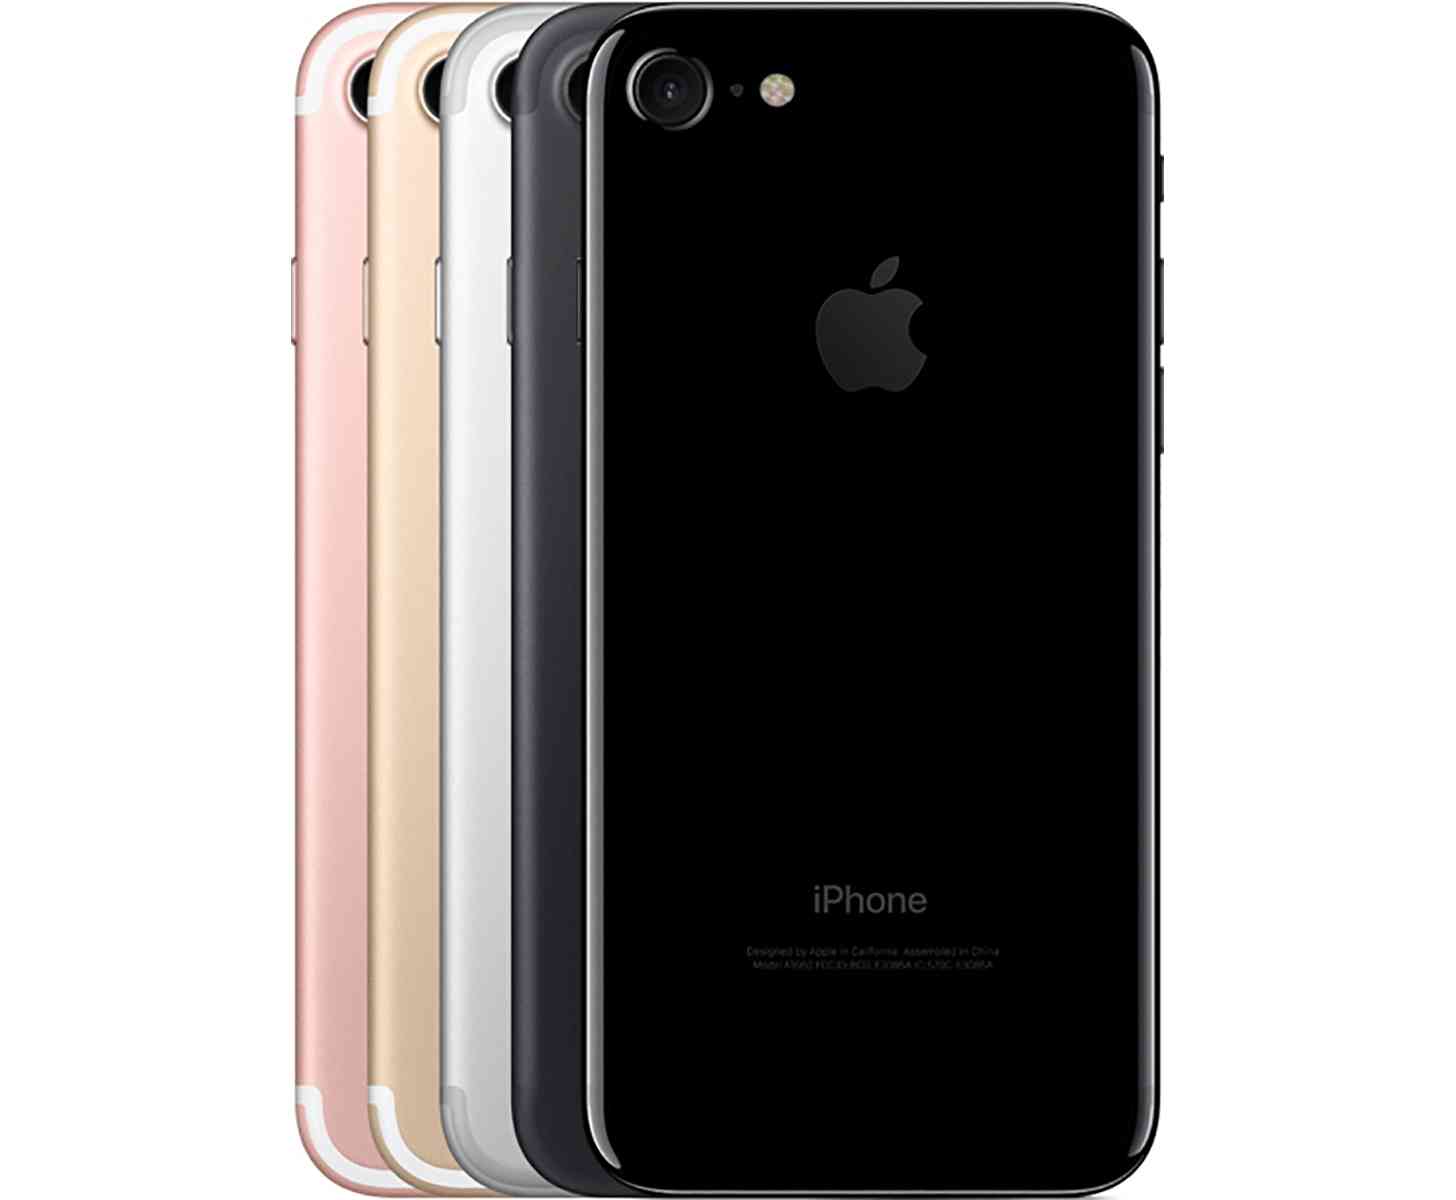 Apple iPhone 7 colors